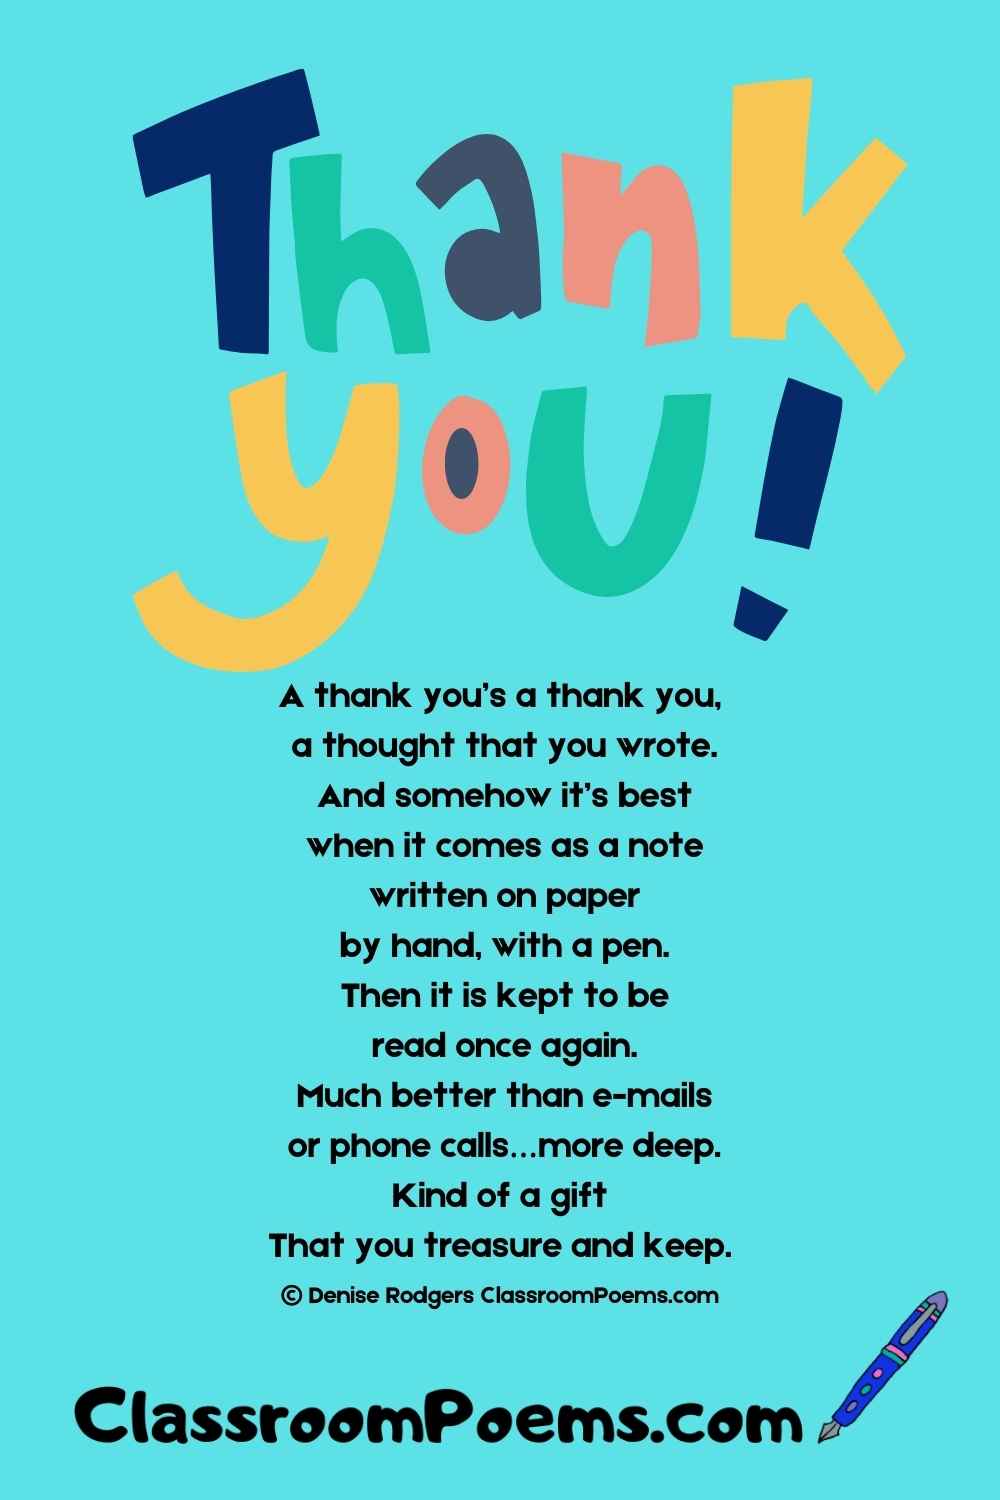 Thank you Poetry Poem by Denise Rodgers on ClassroomPoems.com.